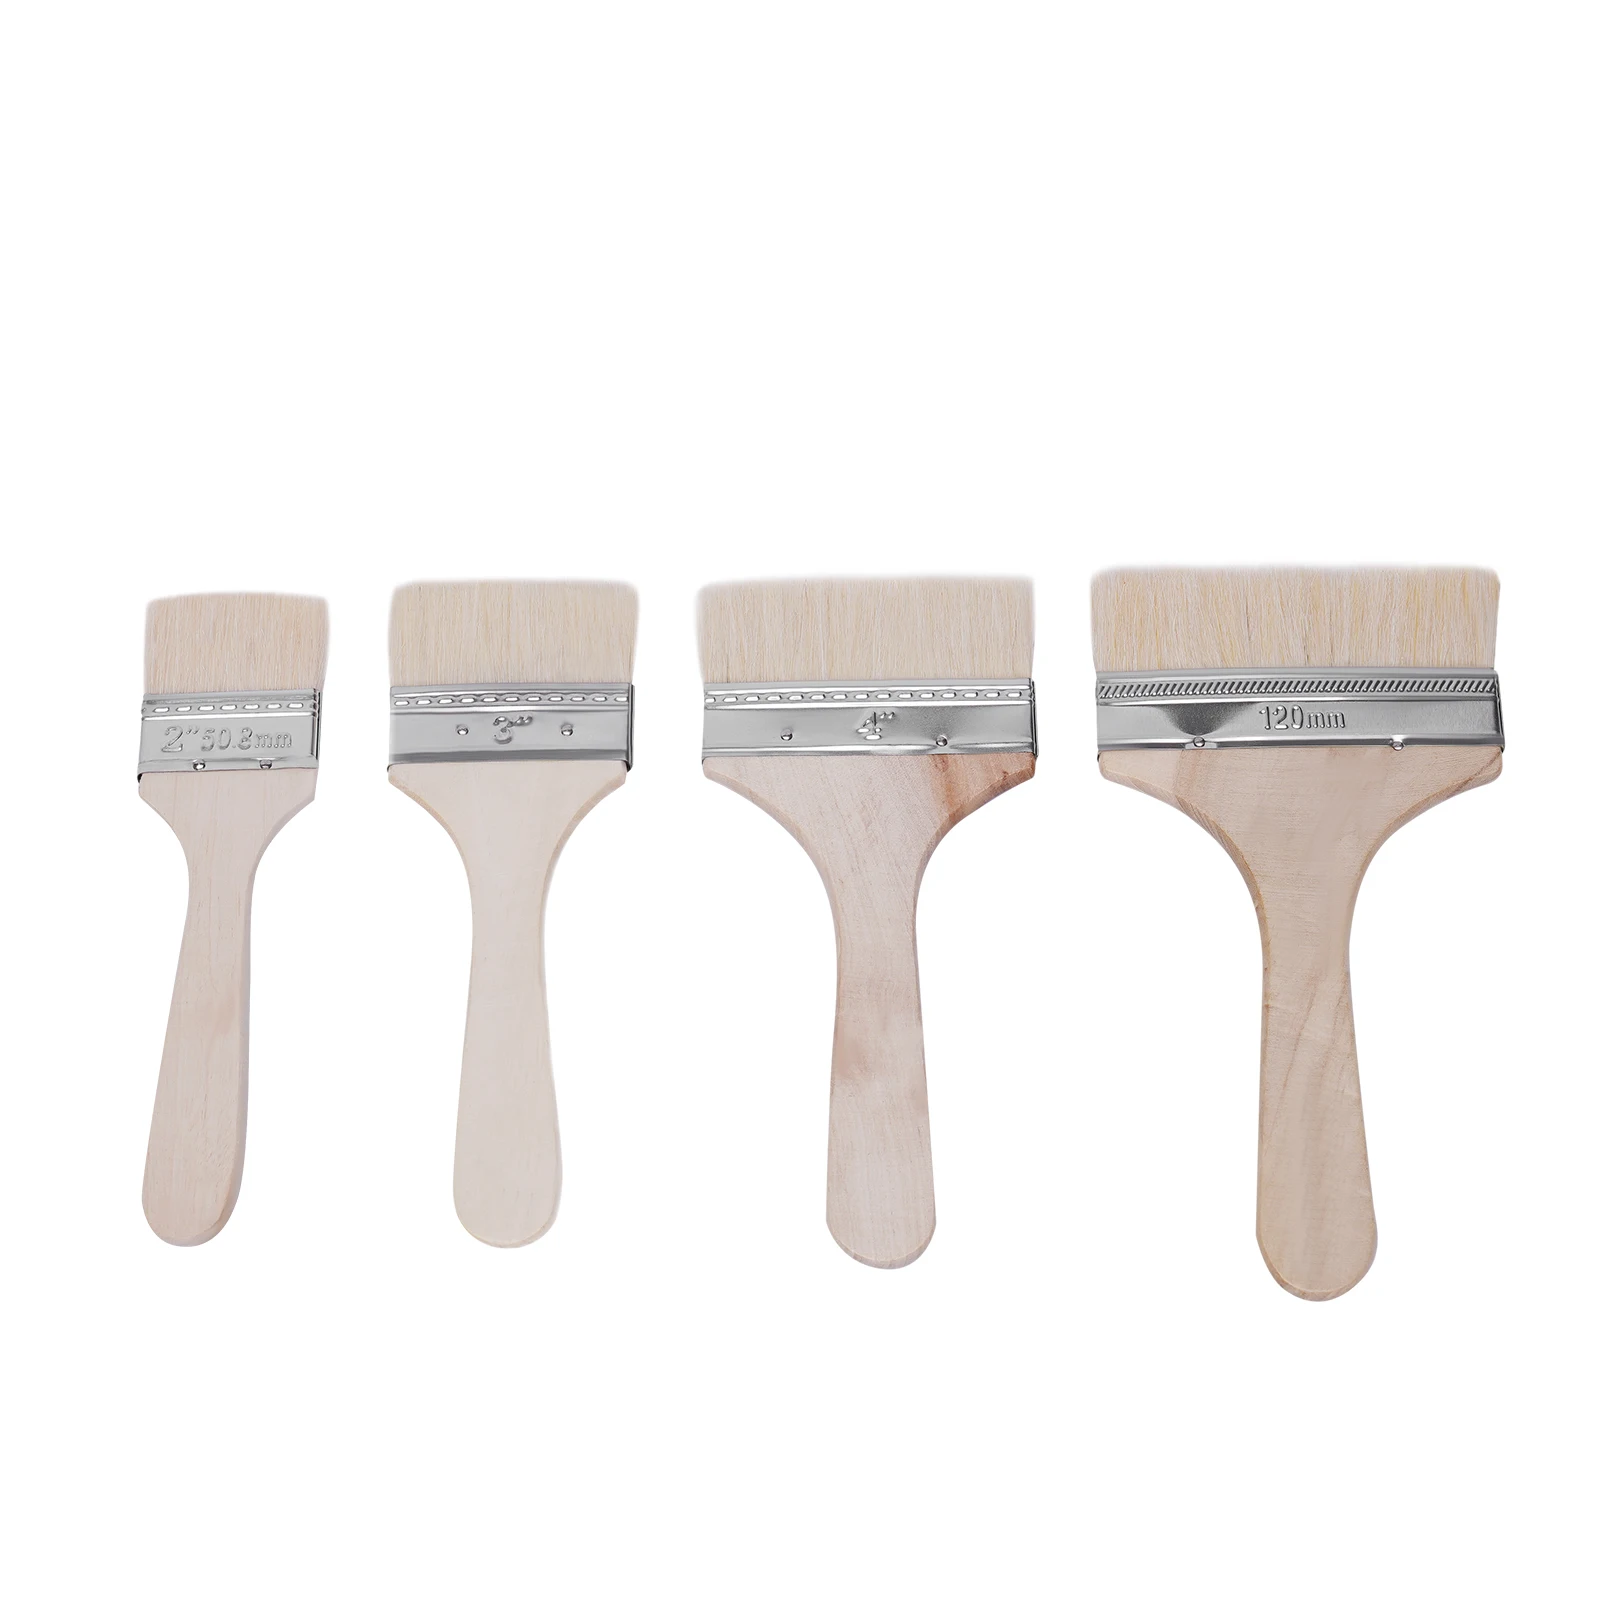 цена Pro Grade Paint Brushes, Variety Angle Paint Brushes, 4 Pack